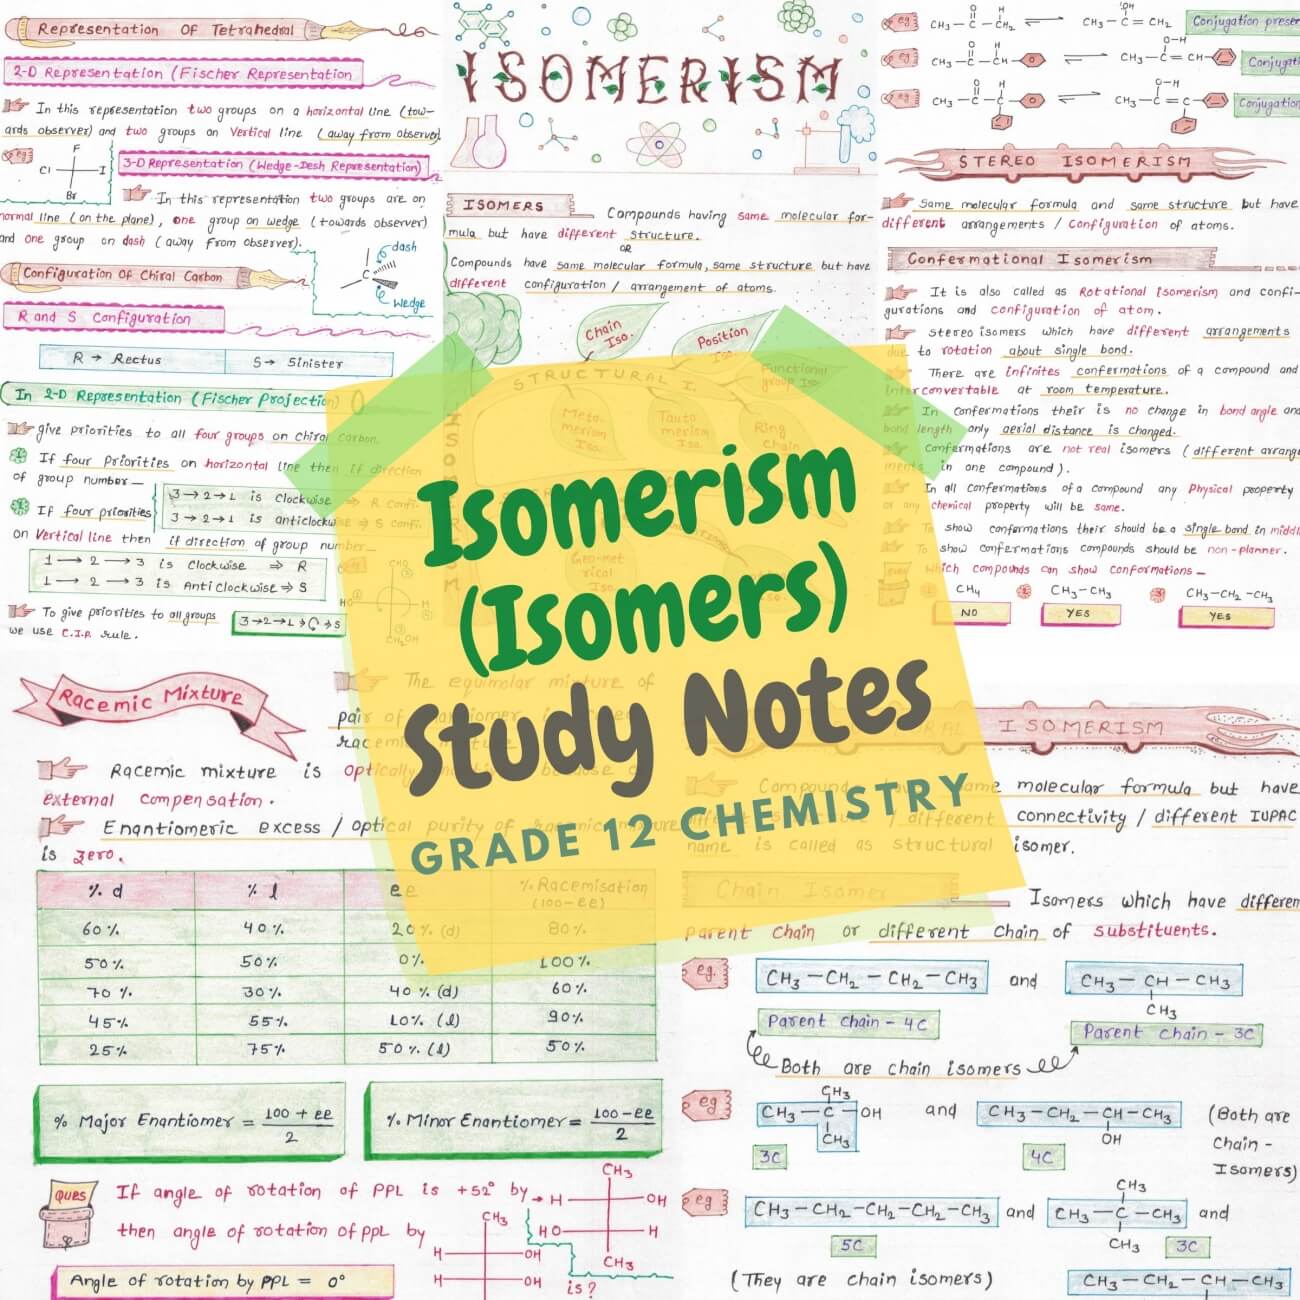 structural Isomerism isomers study notes pdf